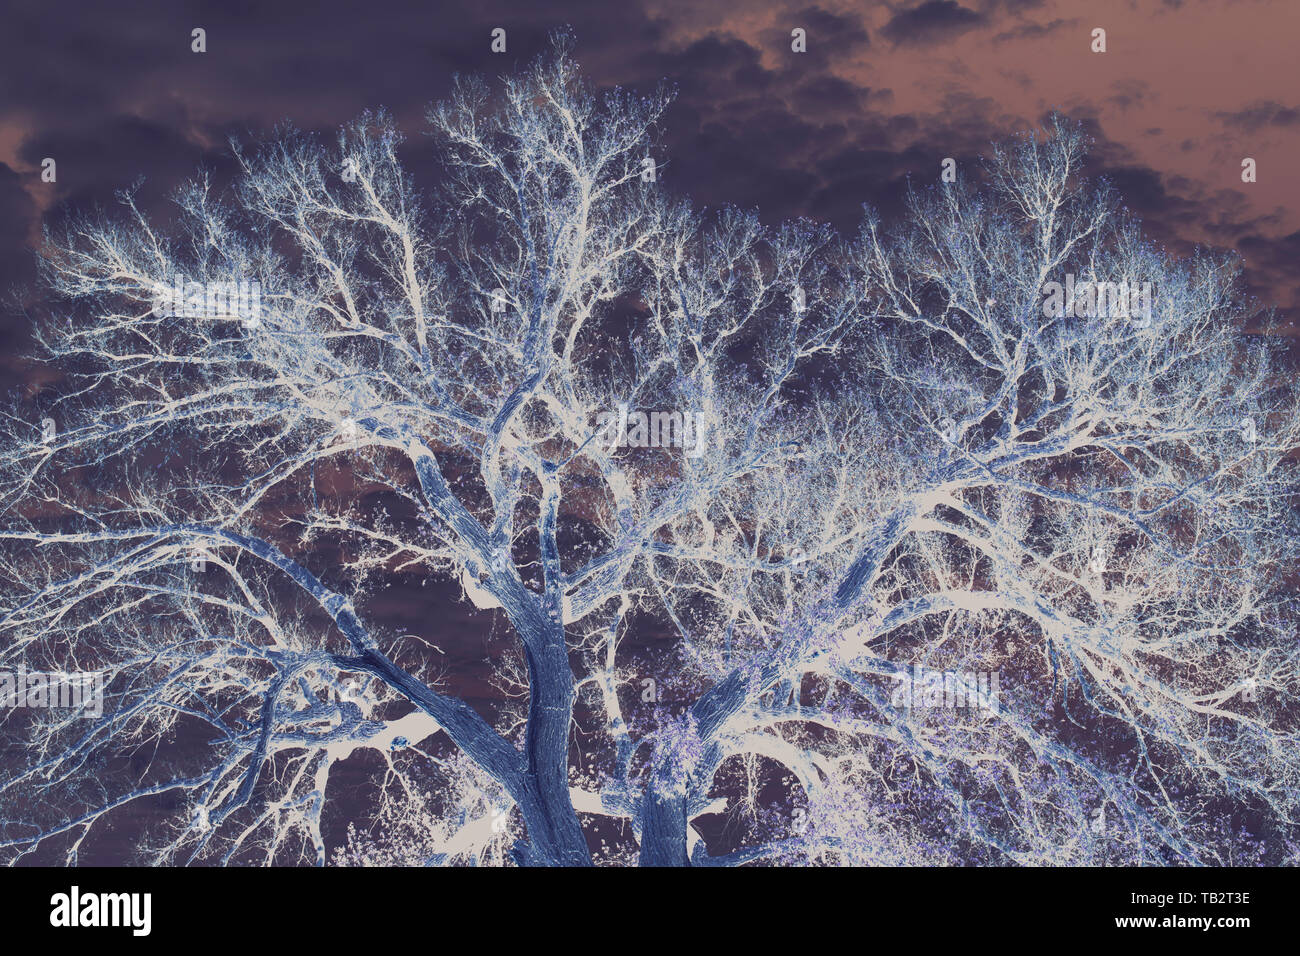 Inverted image of a large cottonwood tree, view from below of the tree canopy and branches against the sky. Stock Photo